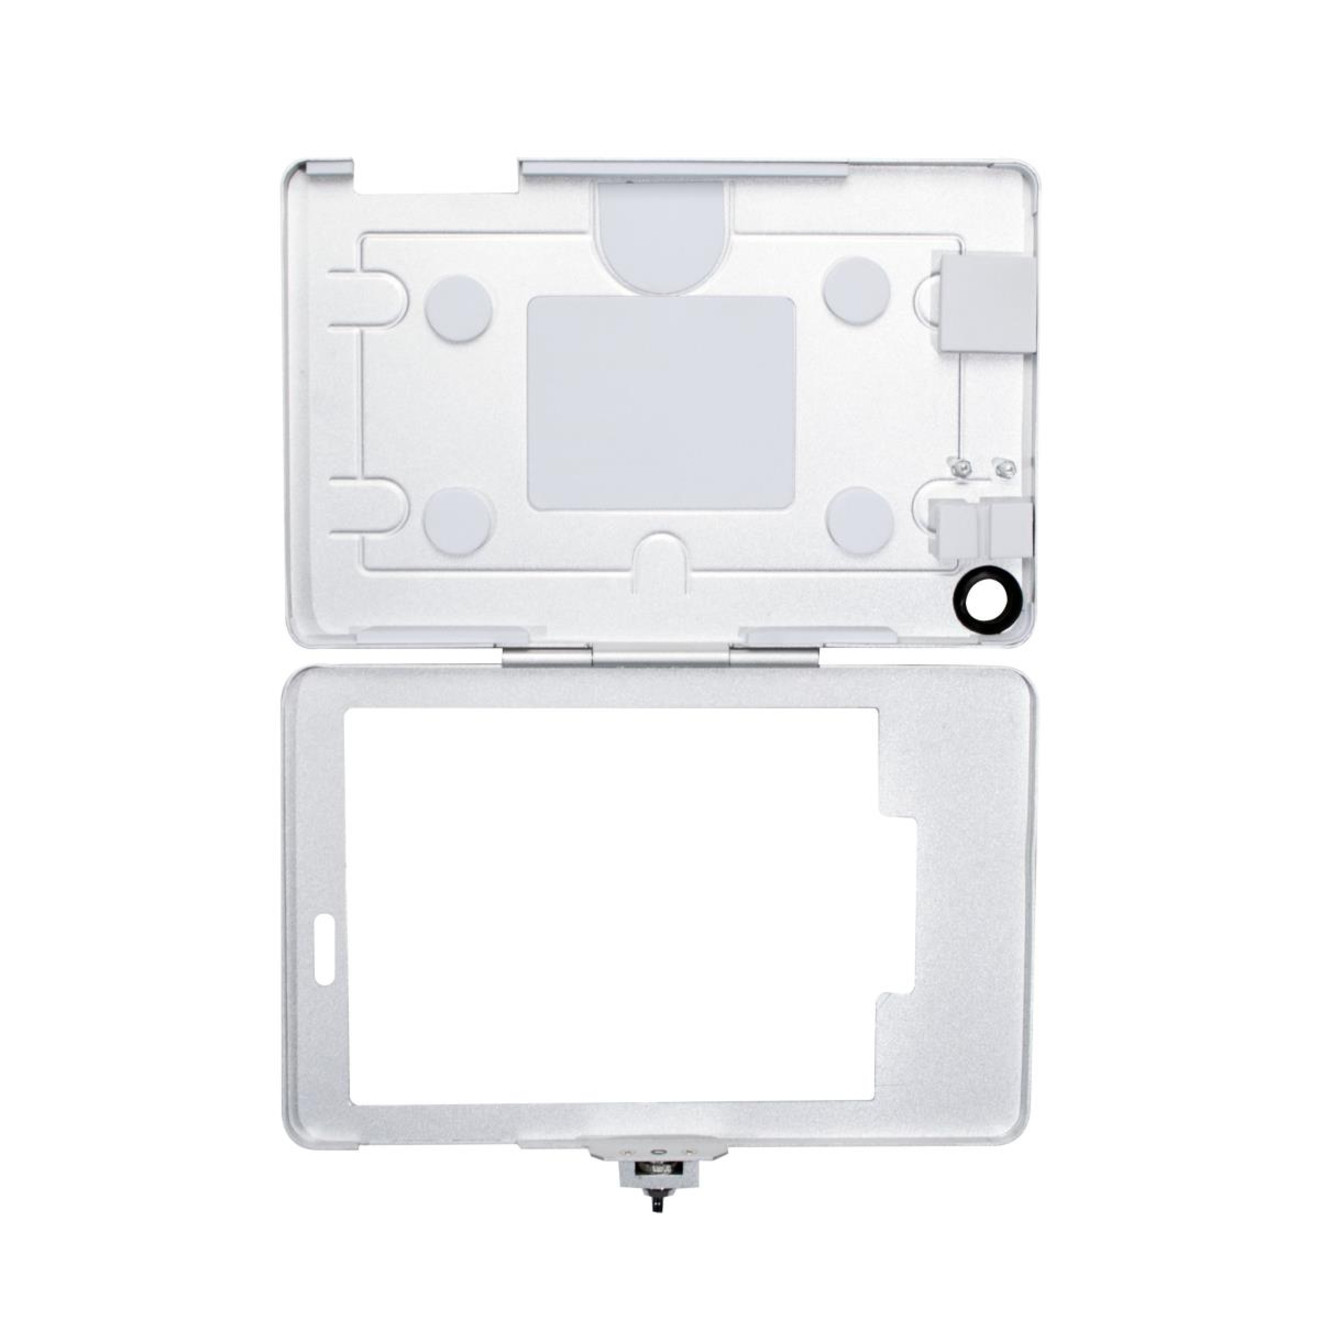 Cta Digital Accessories Security Wall Enclosure Galaxy Tabs /S2/S3 9.7In9.7" Screen Support1 PAD-SWEG Corporate Armor